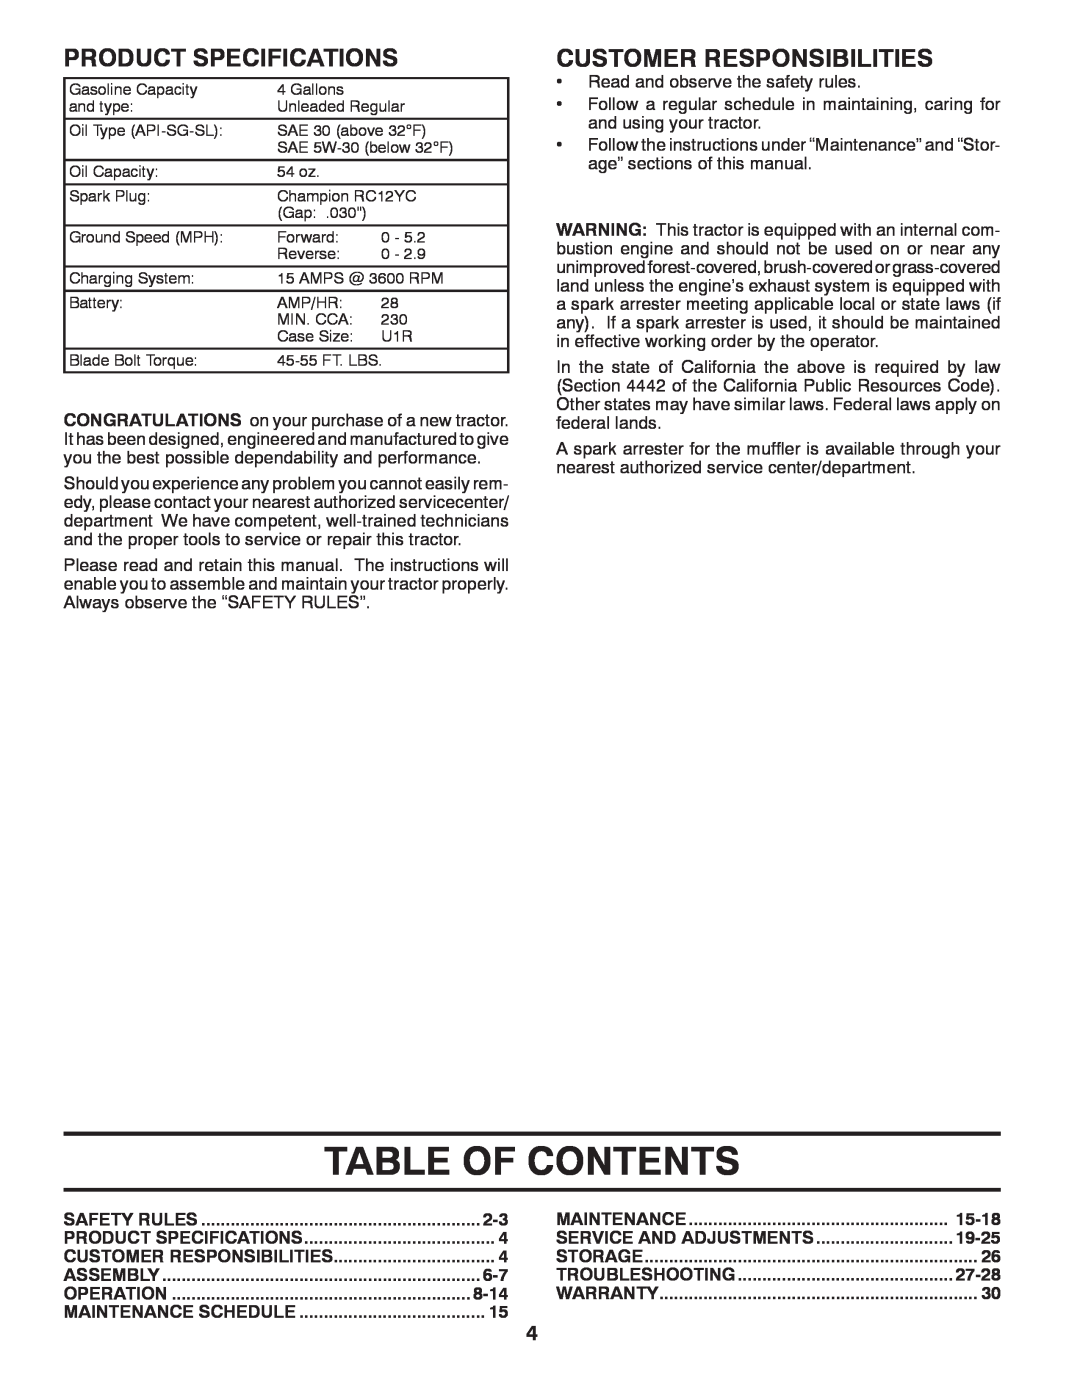 Dixon 434722, D26BH54 manual Table Of Contents, Product Specifications, Customer Responsibilities 